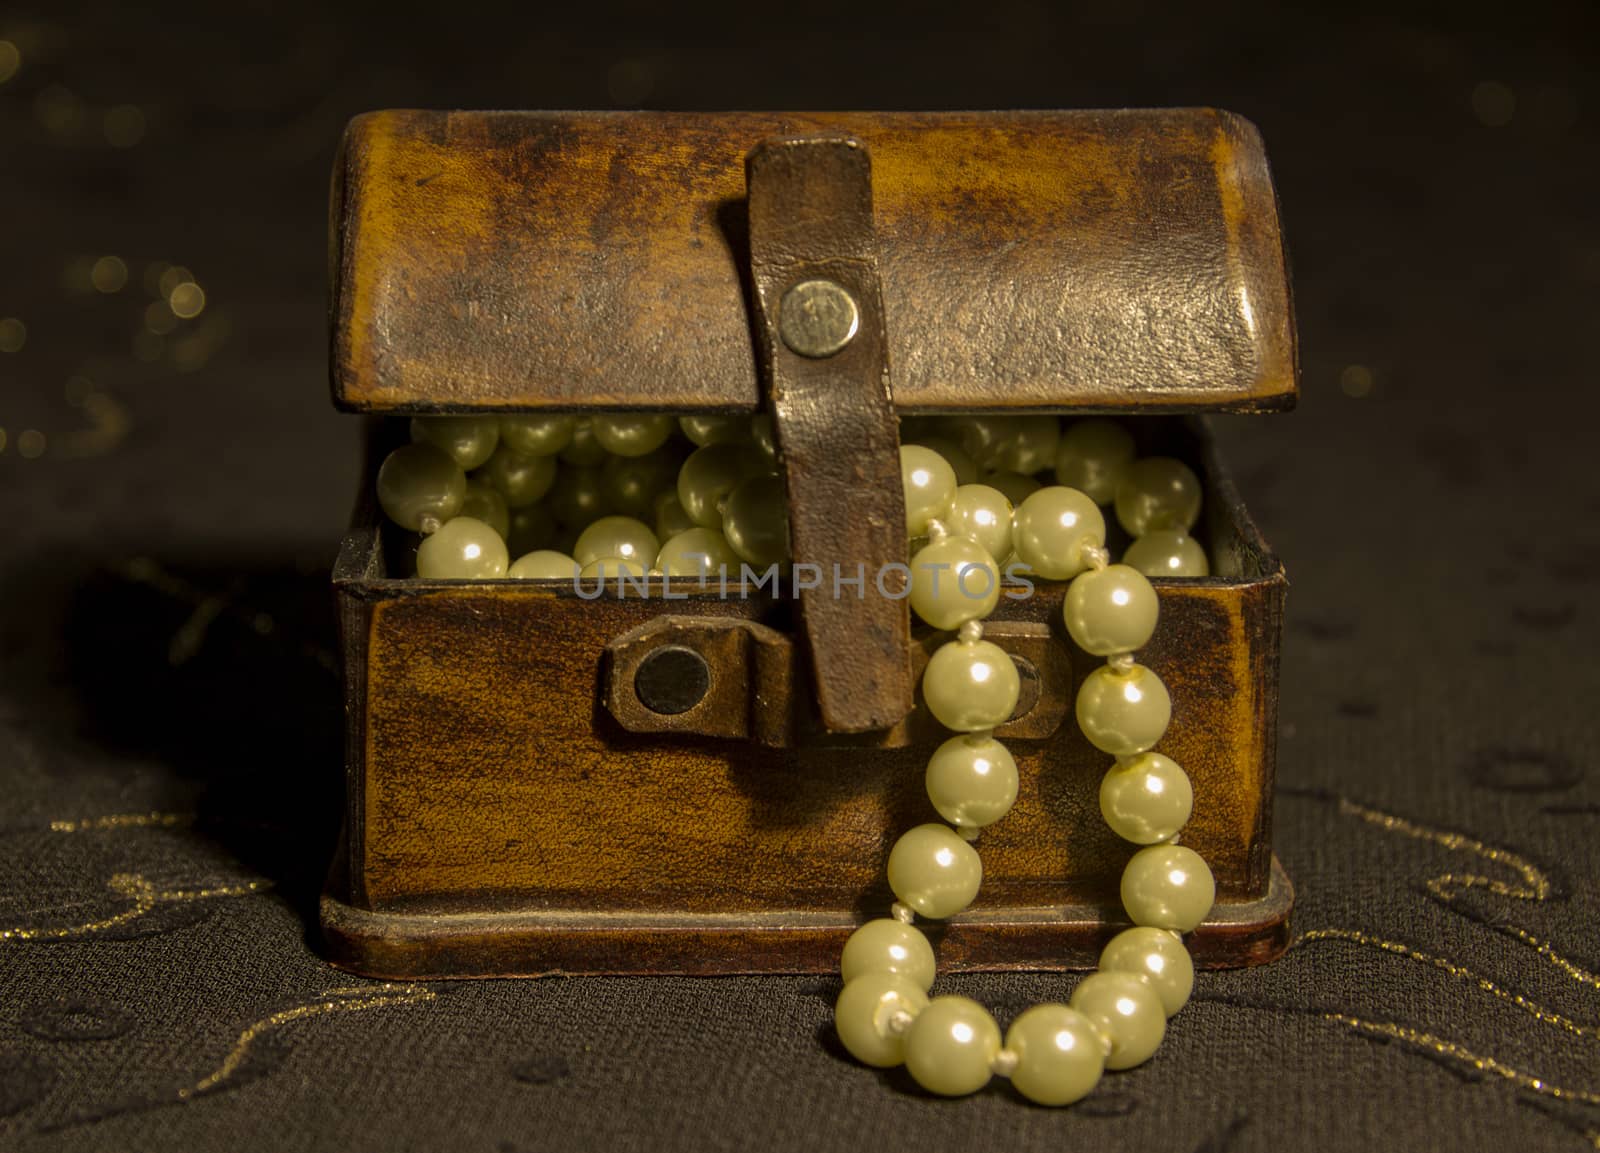 Pearl Necklace in an ancient casket on a dark background